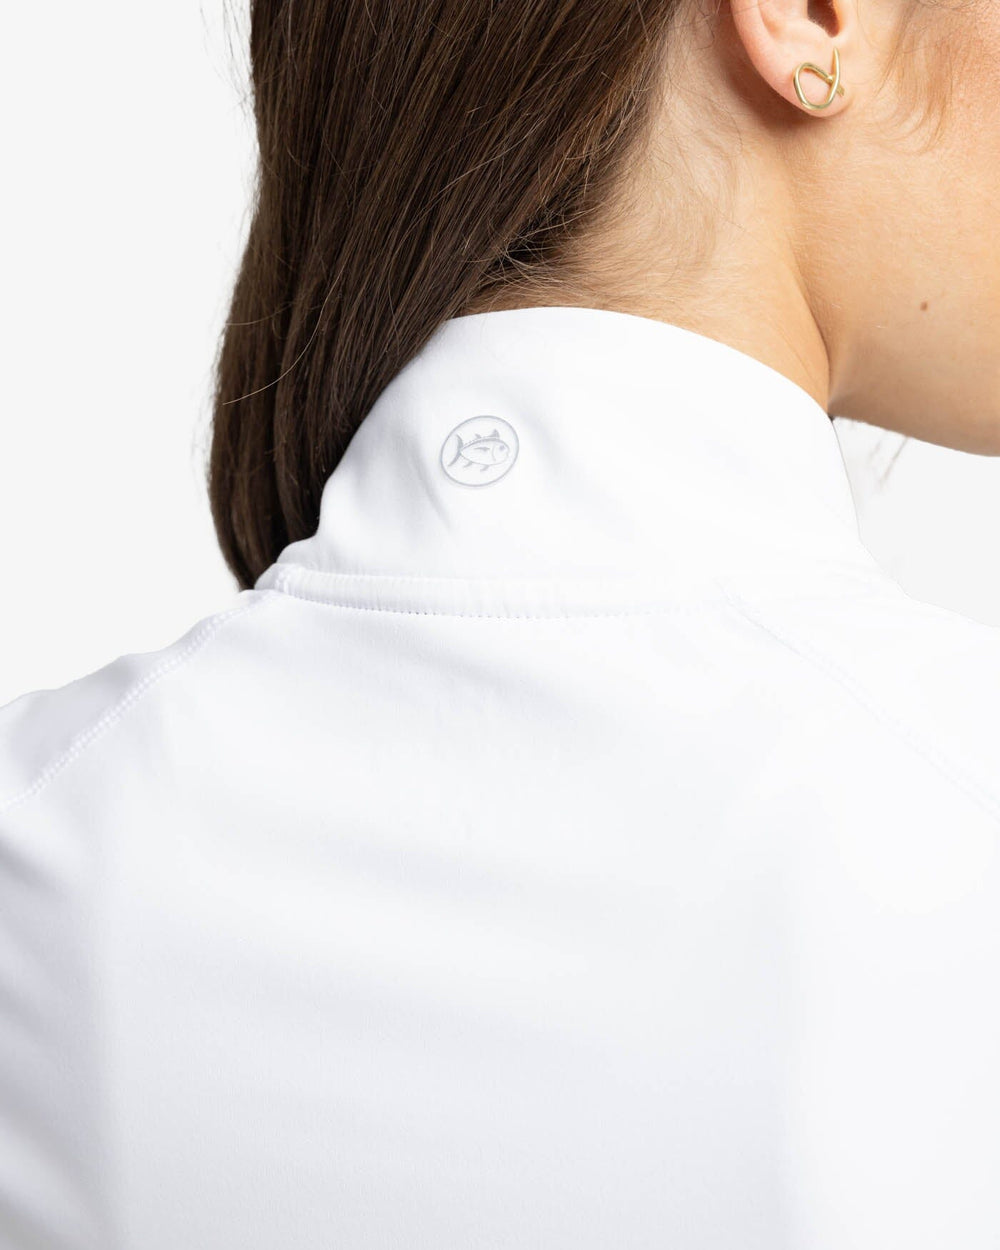 The yoke view of the Southern Tide Runaround Quarter Zip Pull Over by Southern Tide - Classic White